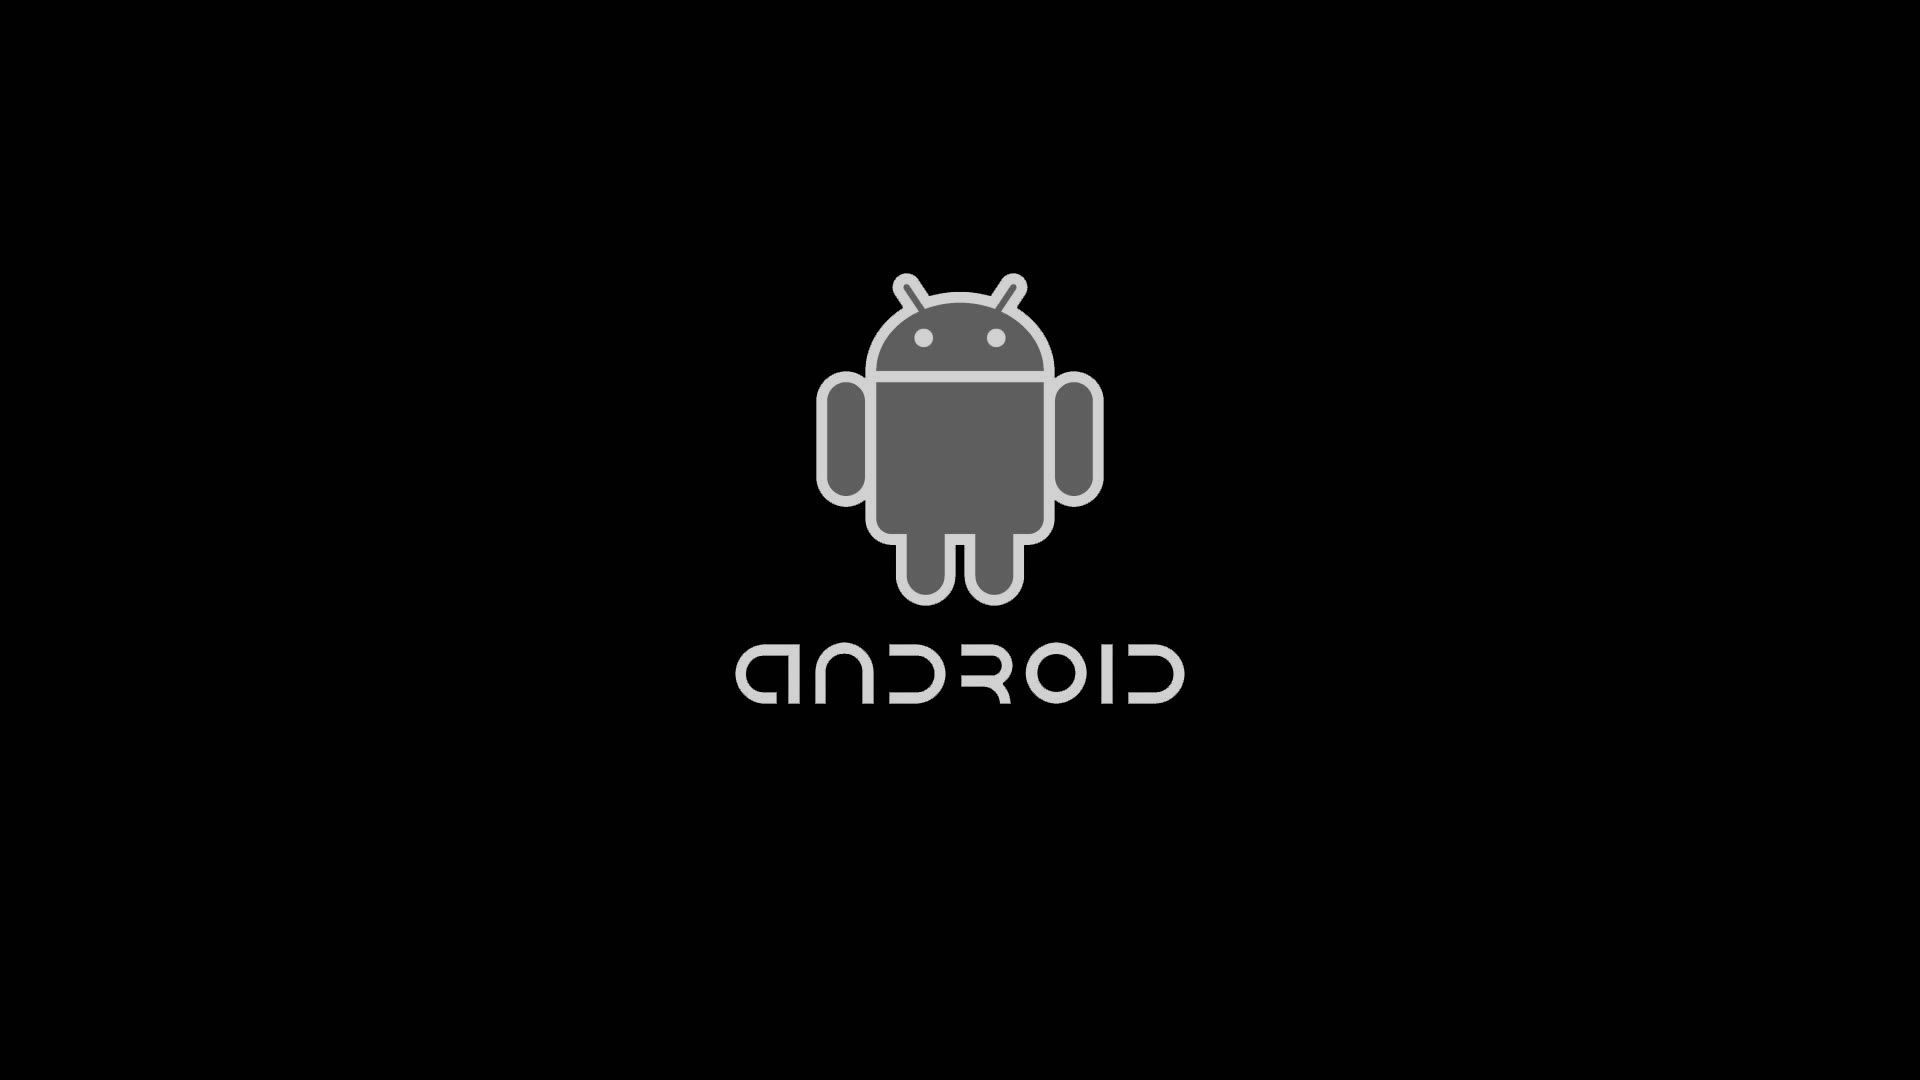 1920x1080 android logo hd wallpapers #909843